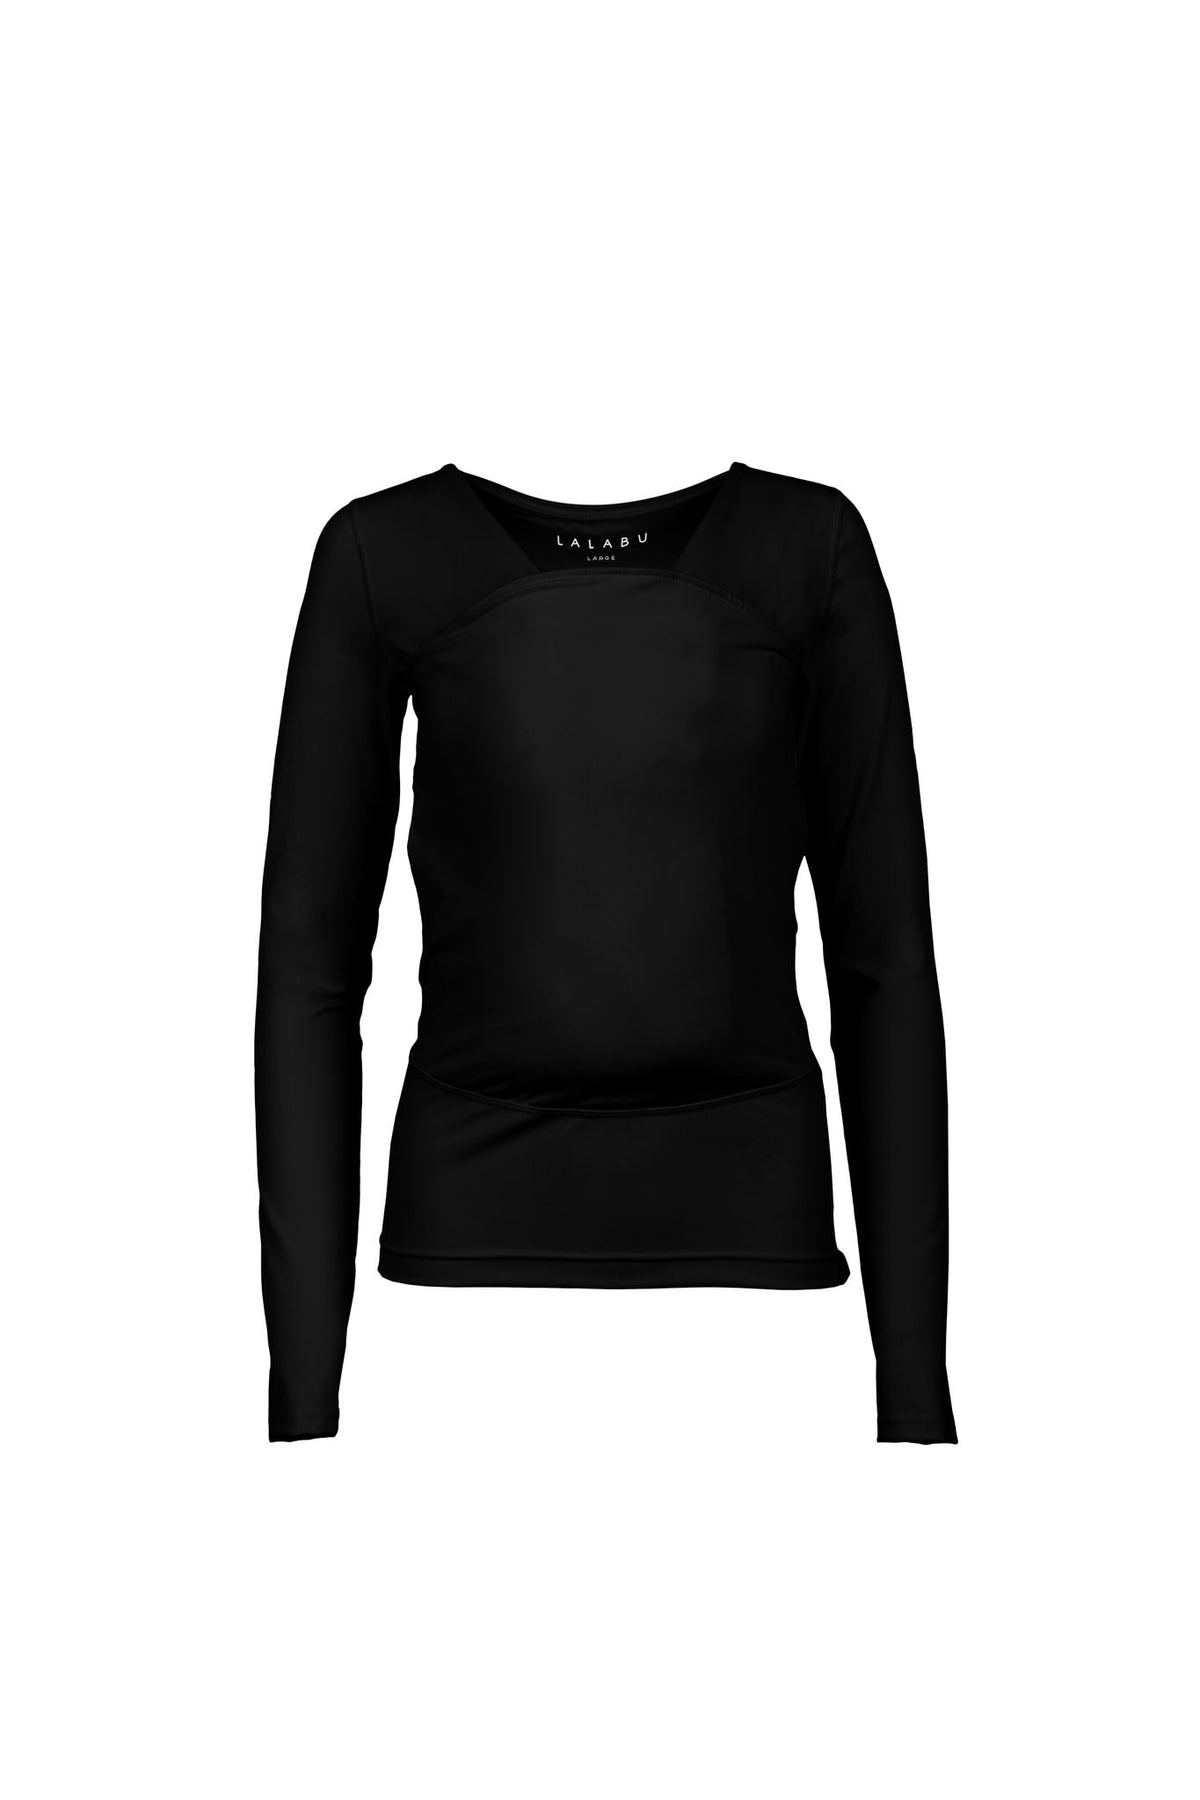 Black long sleeve Soothe Shirt with a front pouch for wearing a newborn. Front view.